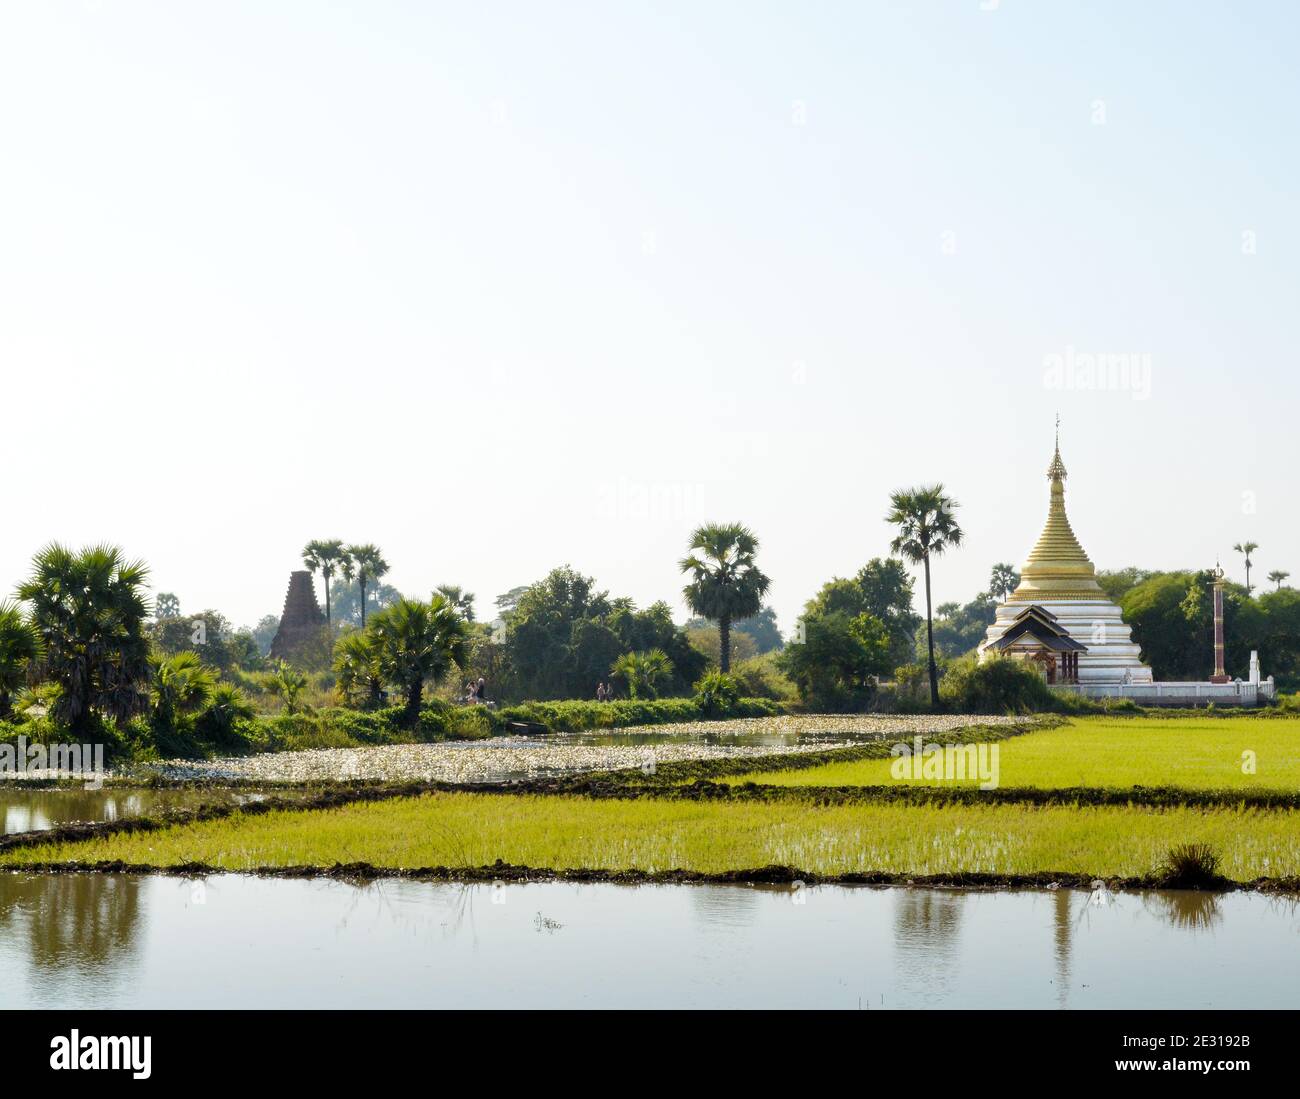 Inwa, Myanmar - A golden pagoda located solely on farmland in Ava, an ancient imperial capital of successive Burmese kingdoms. Stock Photo